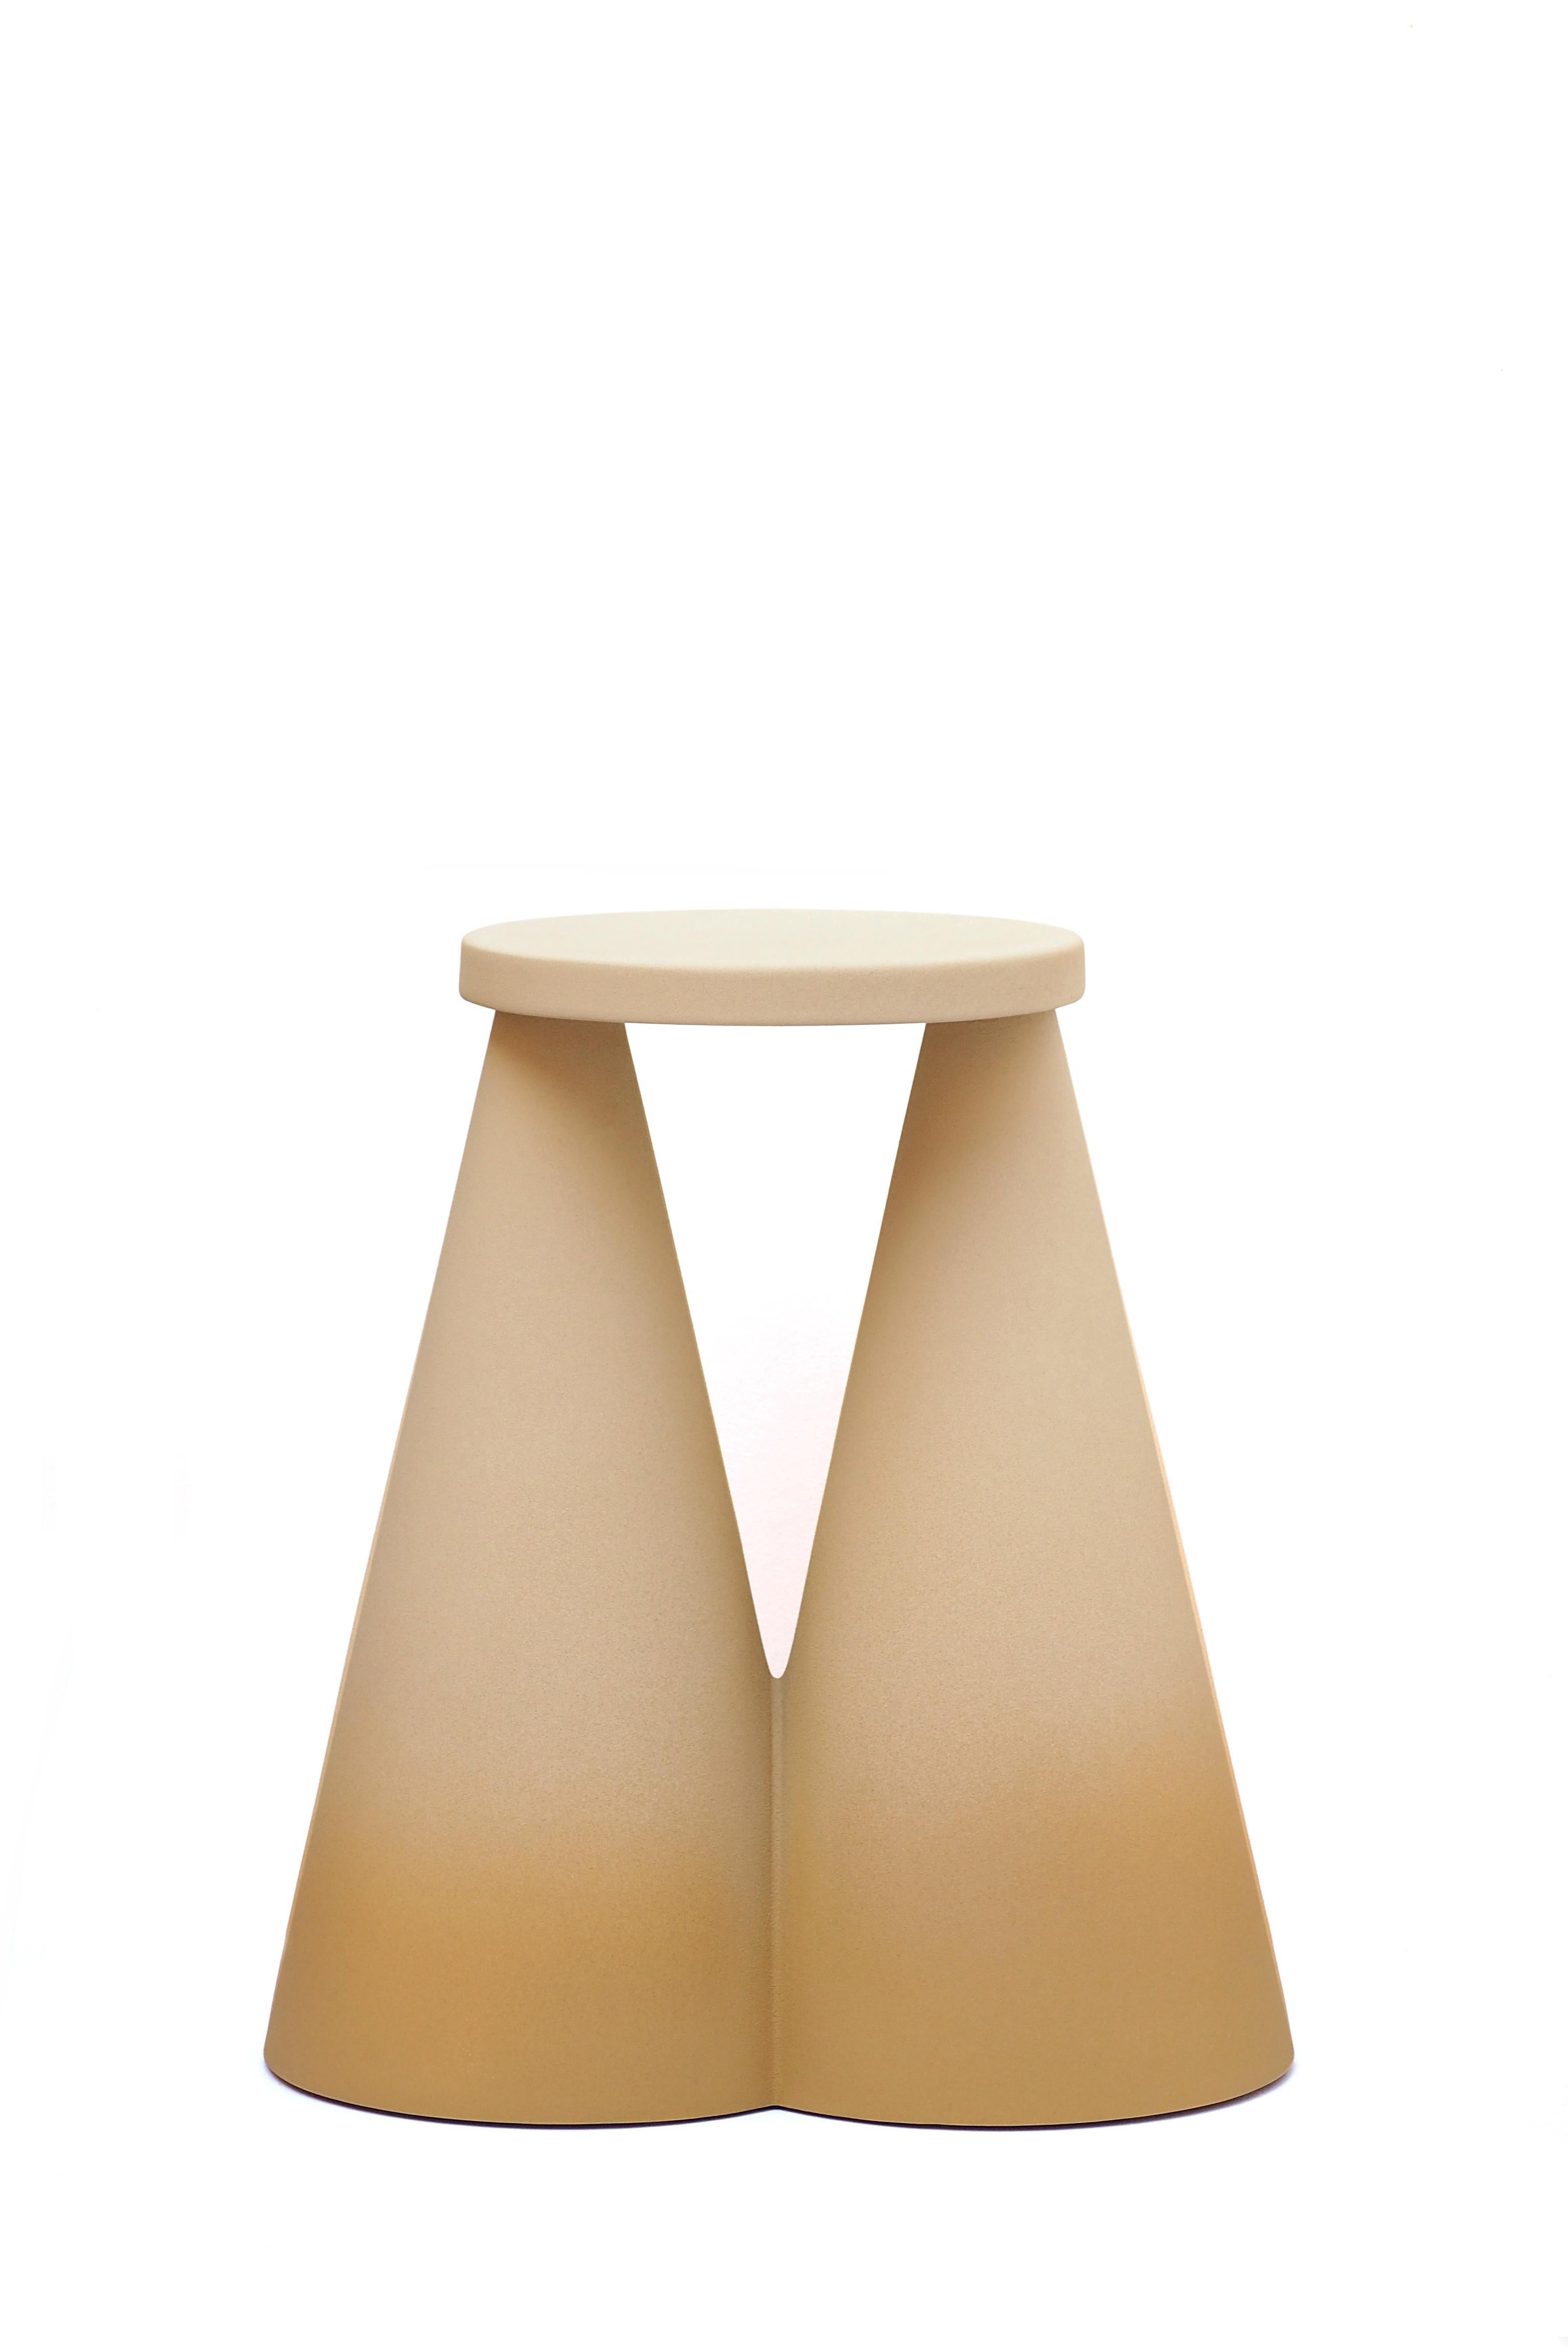 Modern Pair of Honey Isola Side Table by Cara Davide